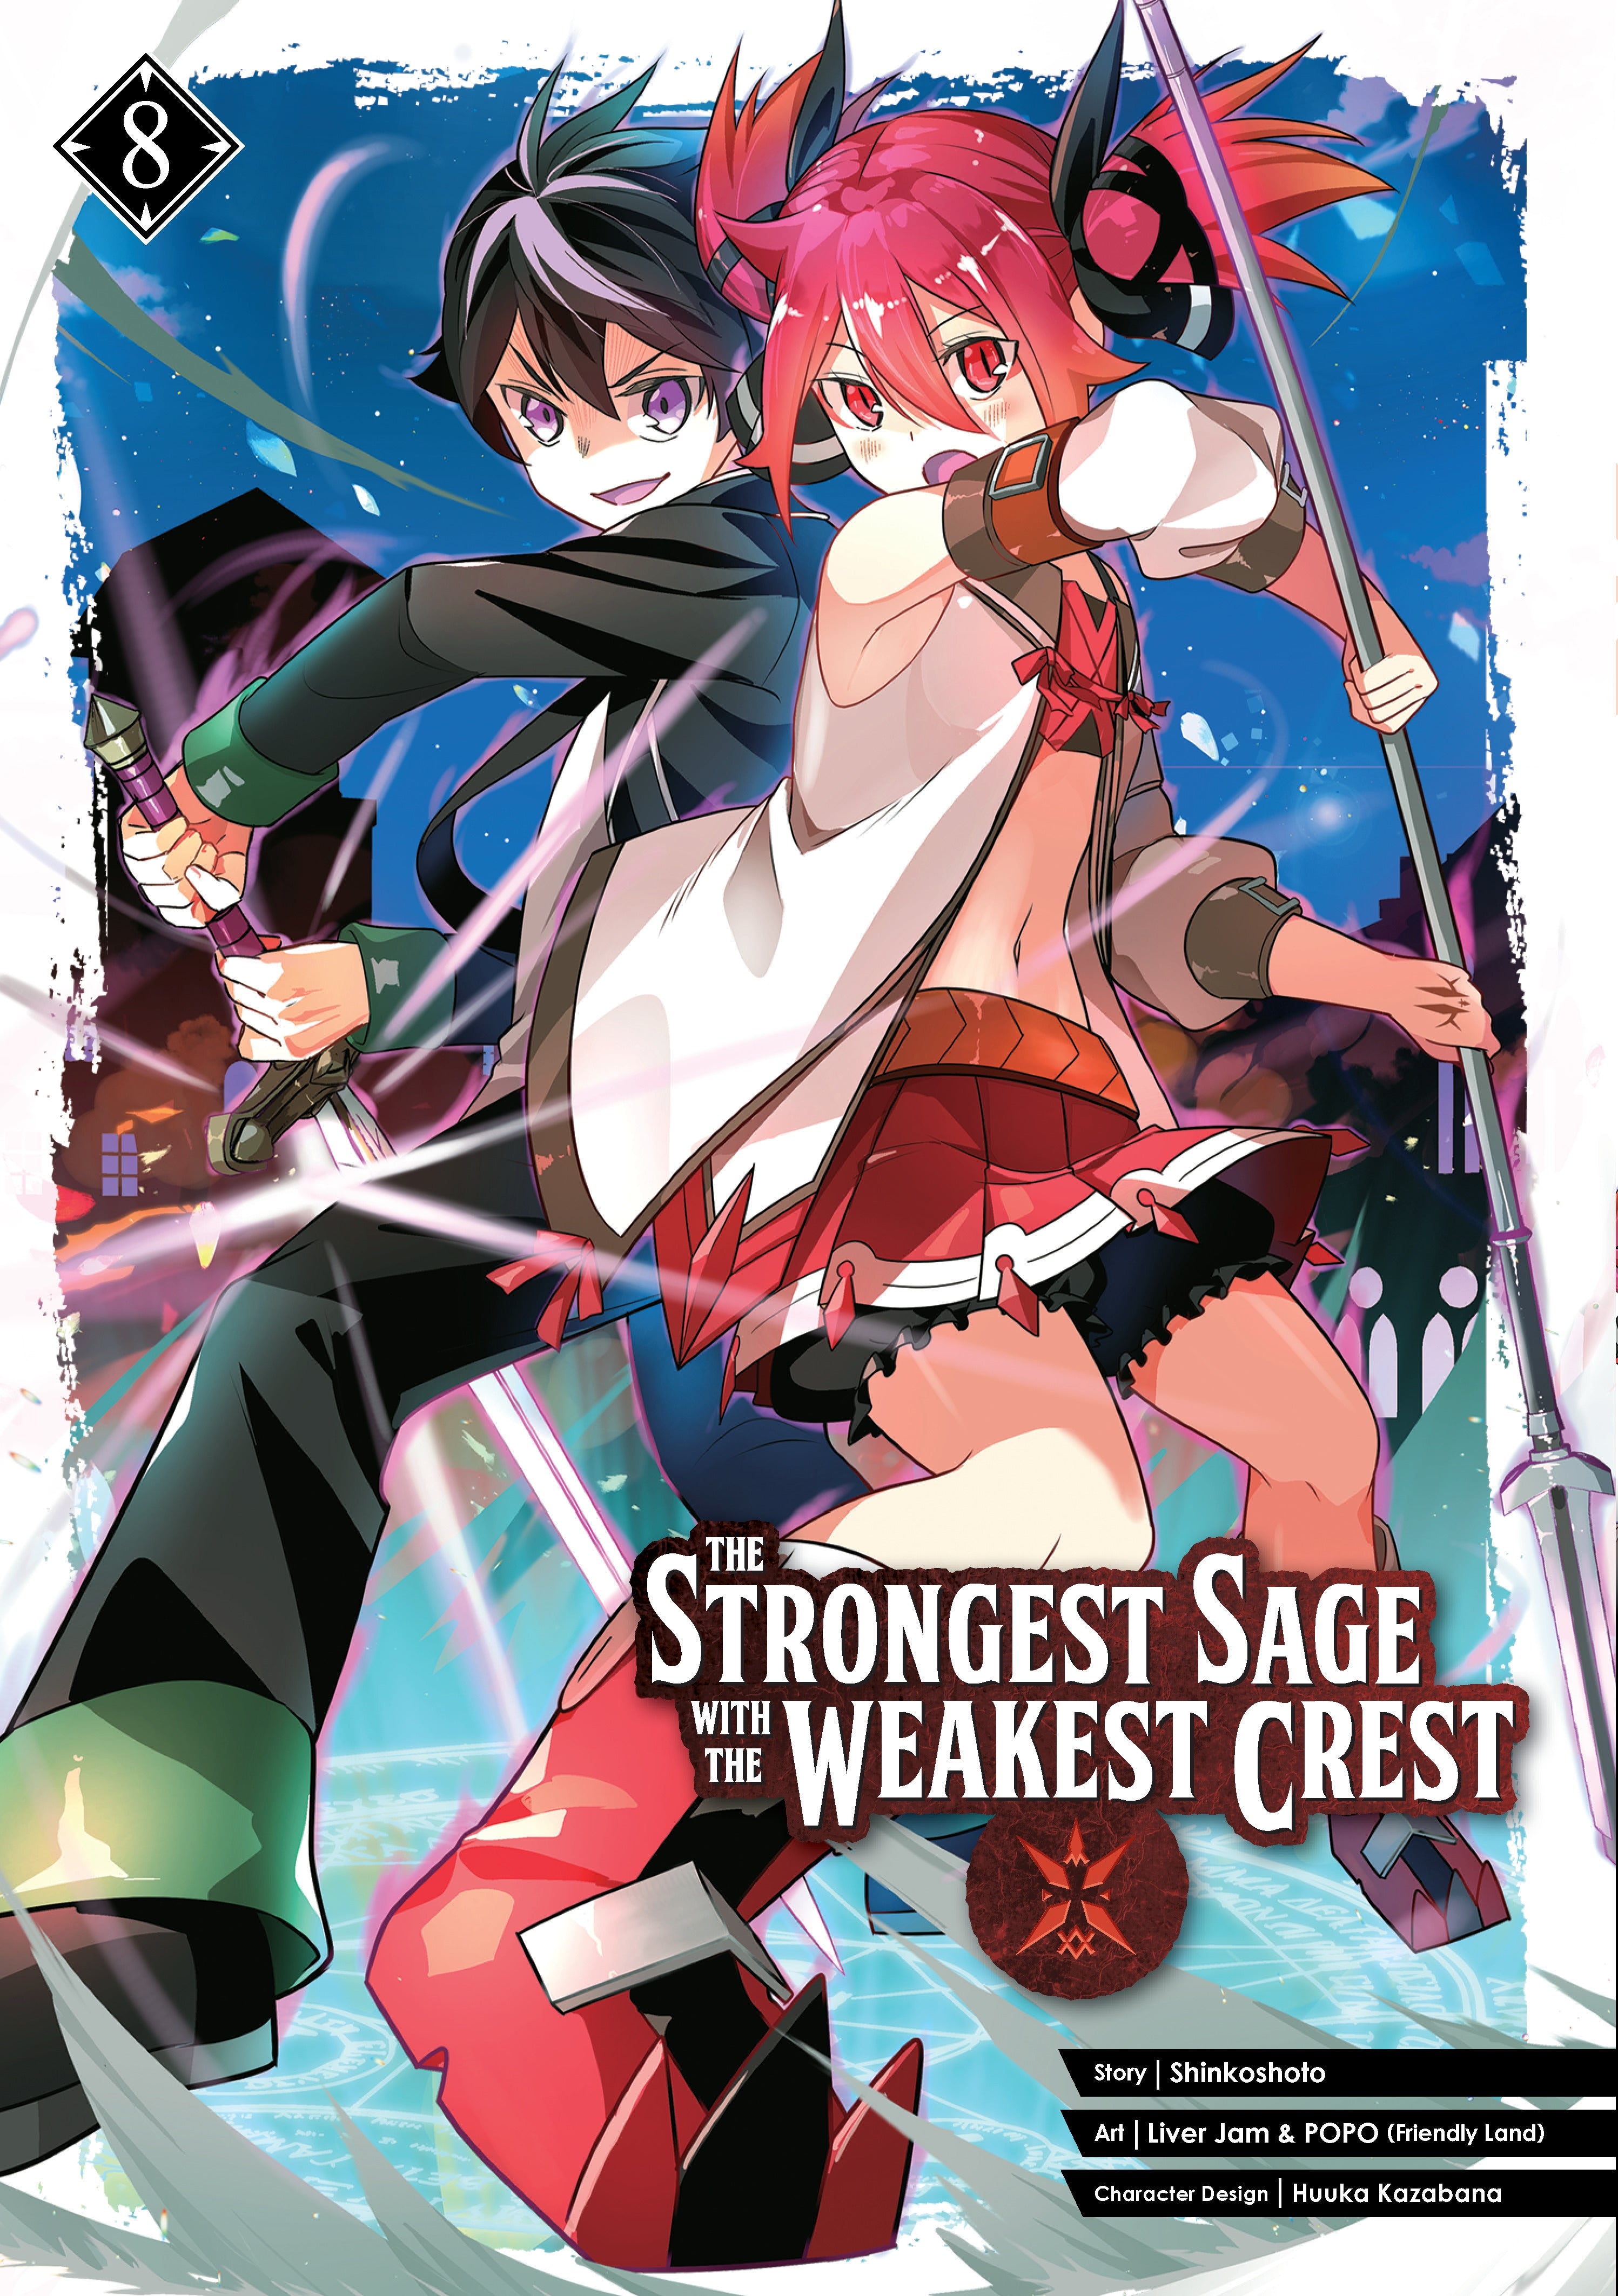 The Strongest Sage with the Weakest Crest, Vol. 8